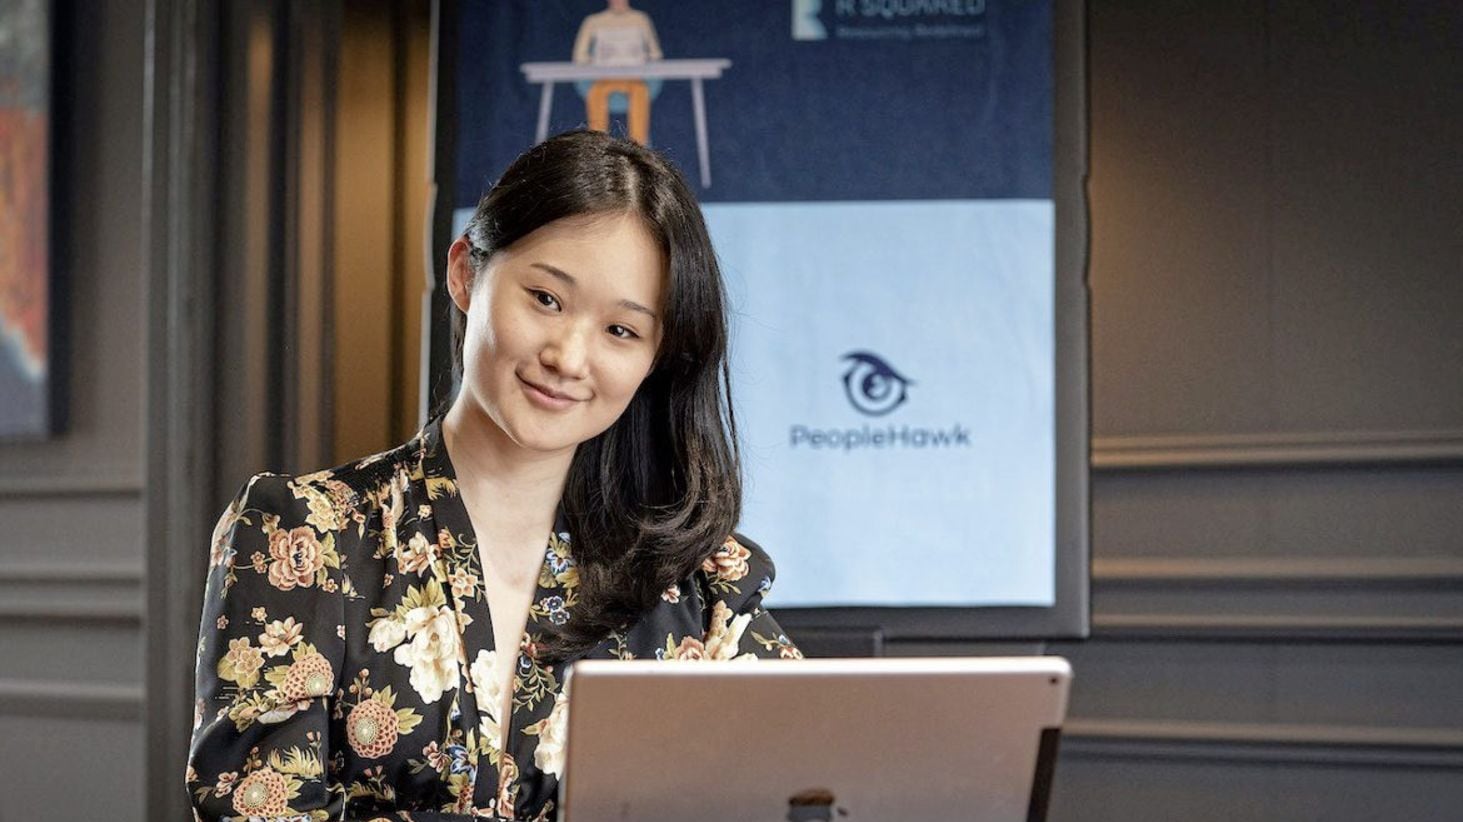 Eunjin Oh was able to secure a job as a set designer after using PeopleHawk to work on her video interview skills PICTURE: Brian Morrison